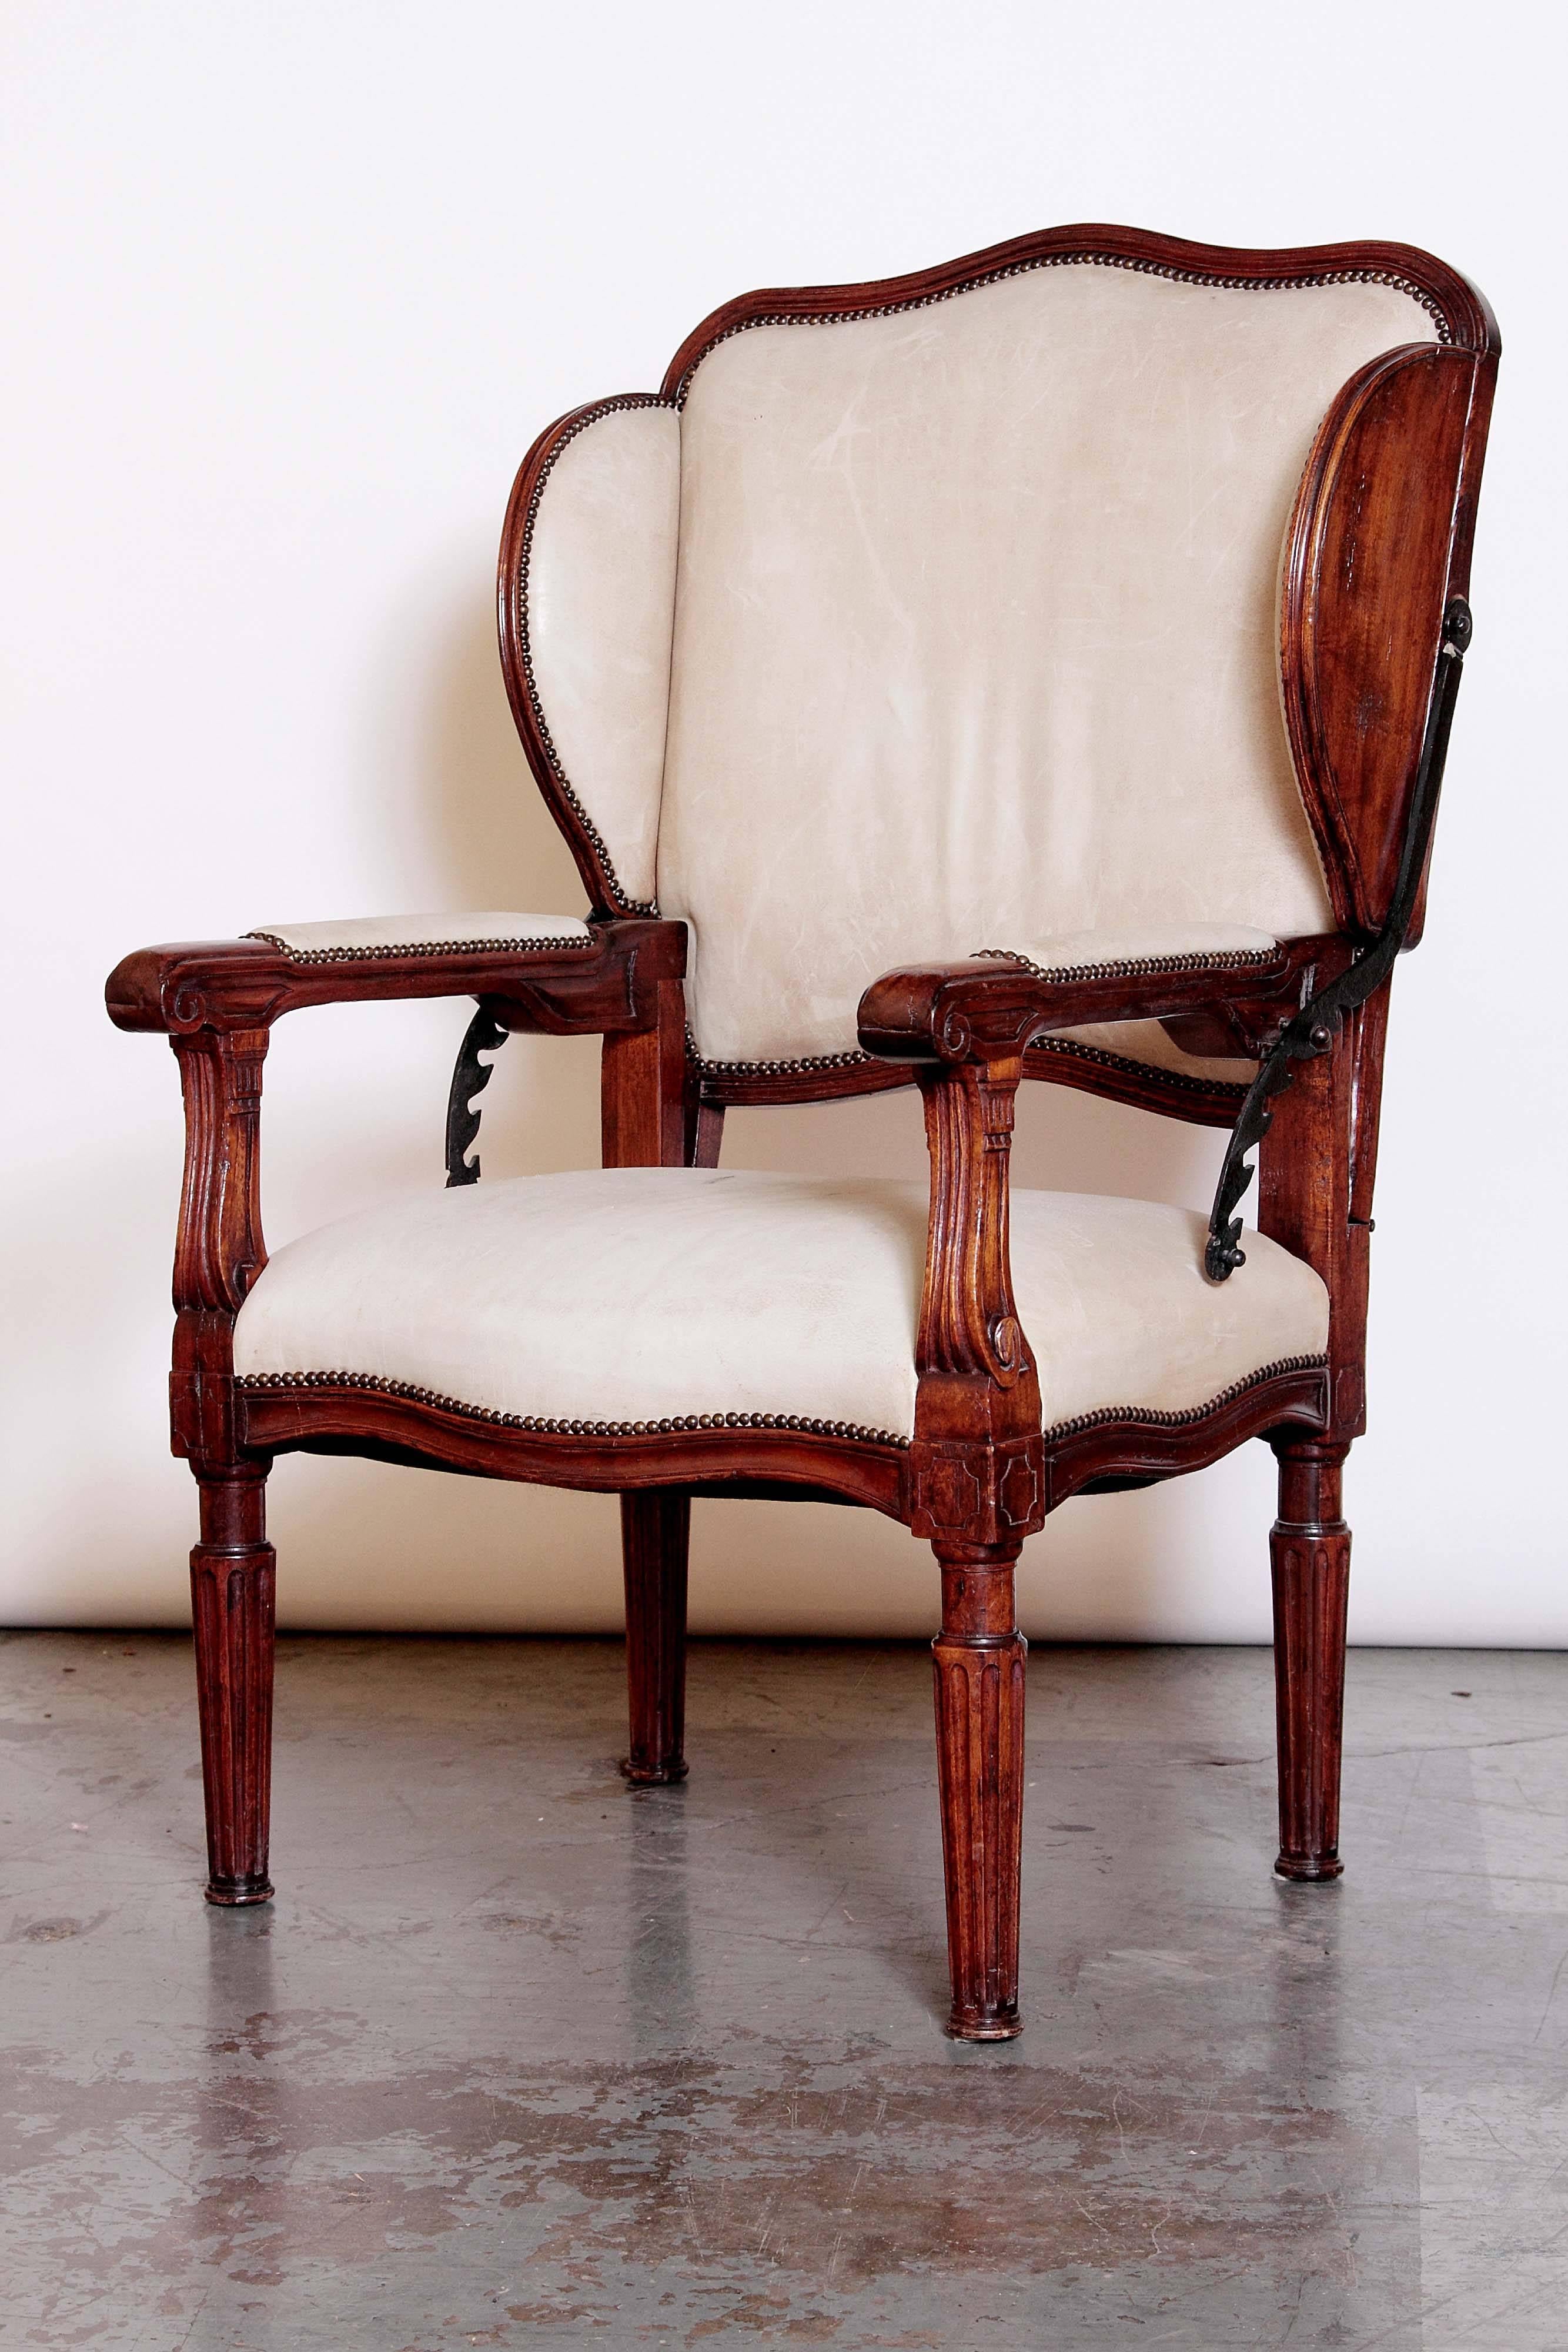 A rare and wonderful French reclining wingback armchair.

Of very generous scale, the armchair is upholstered in light buff leather, with nailhead trim.

The reclining ratchet mechanism, hinges, and brackets are of darkened steel.

A truly